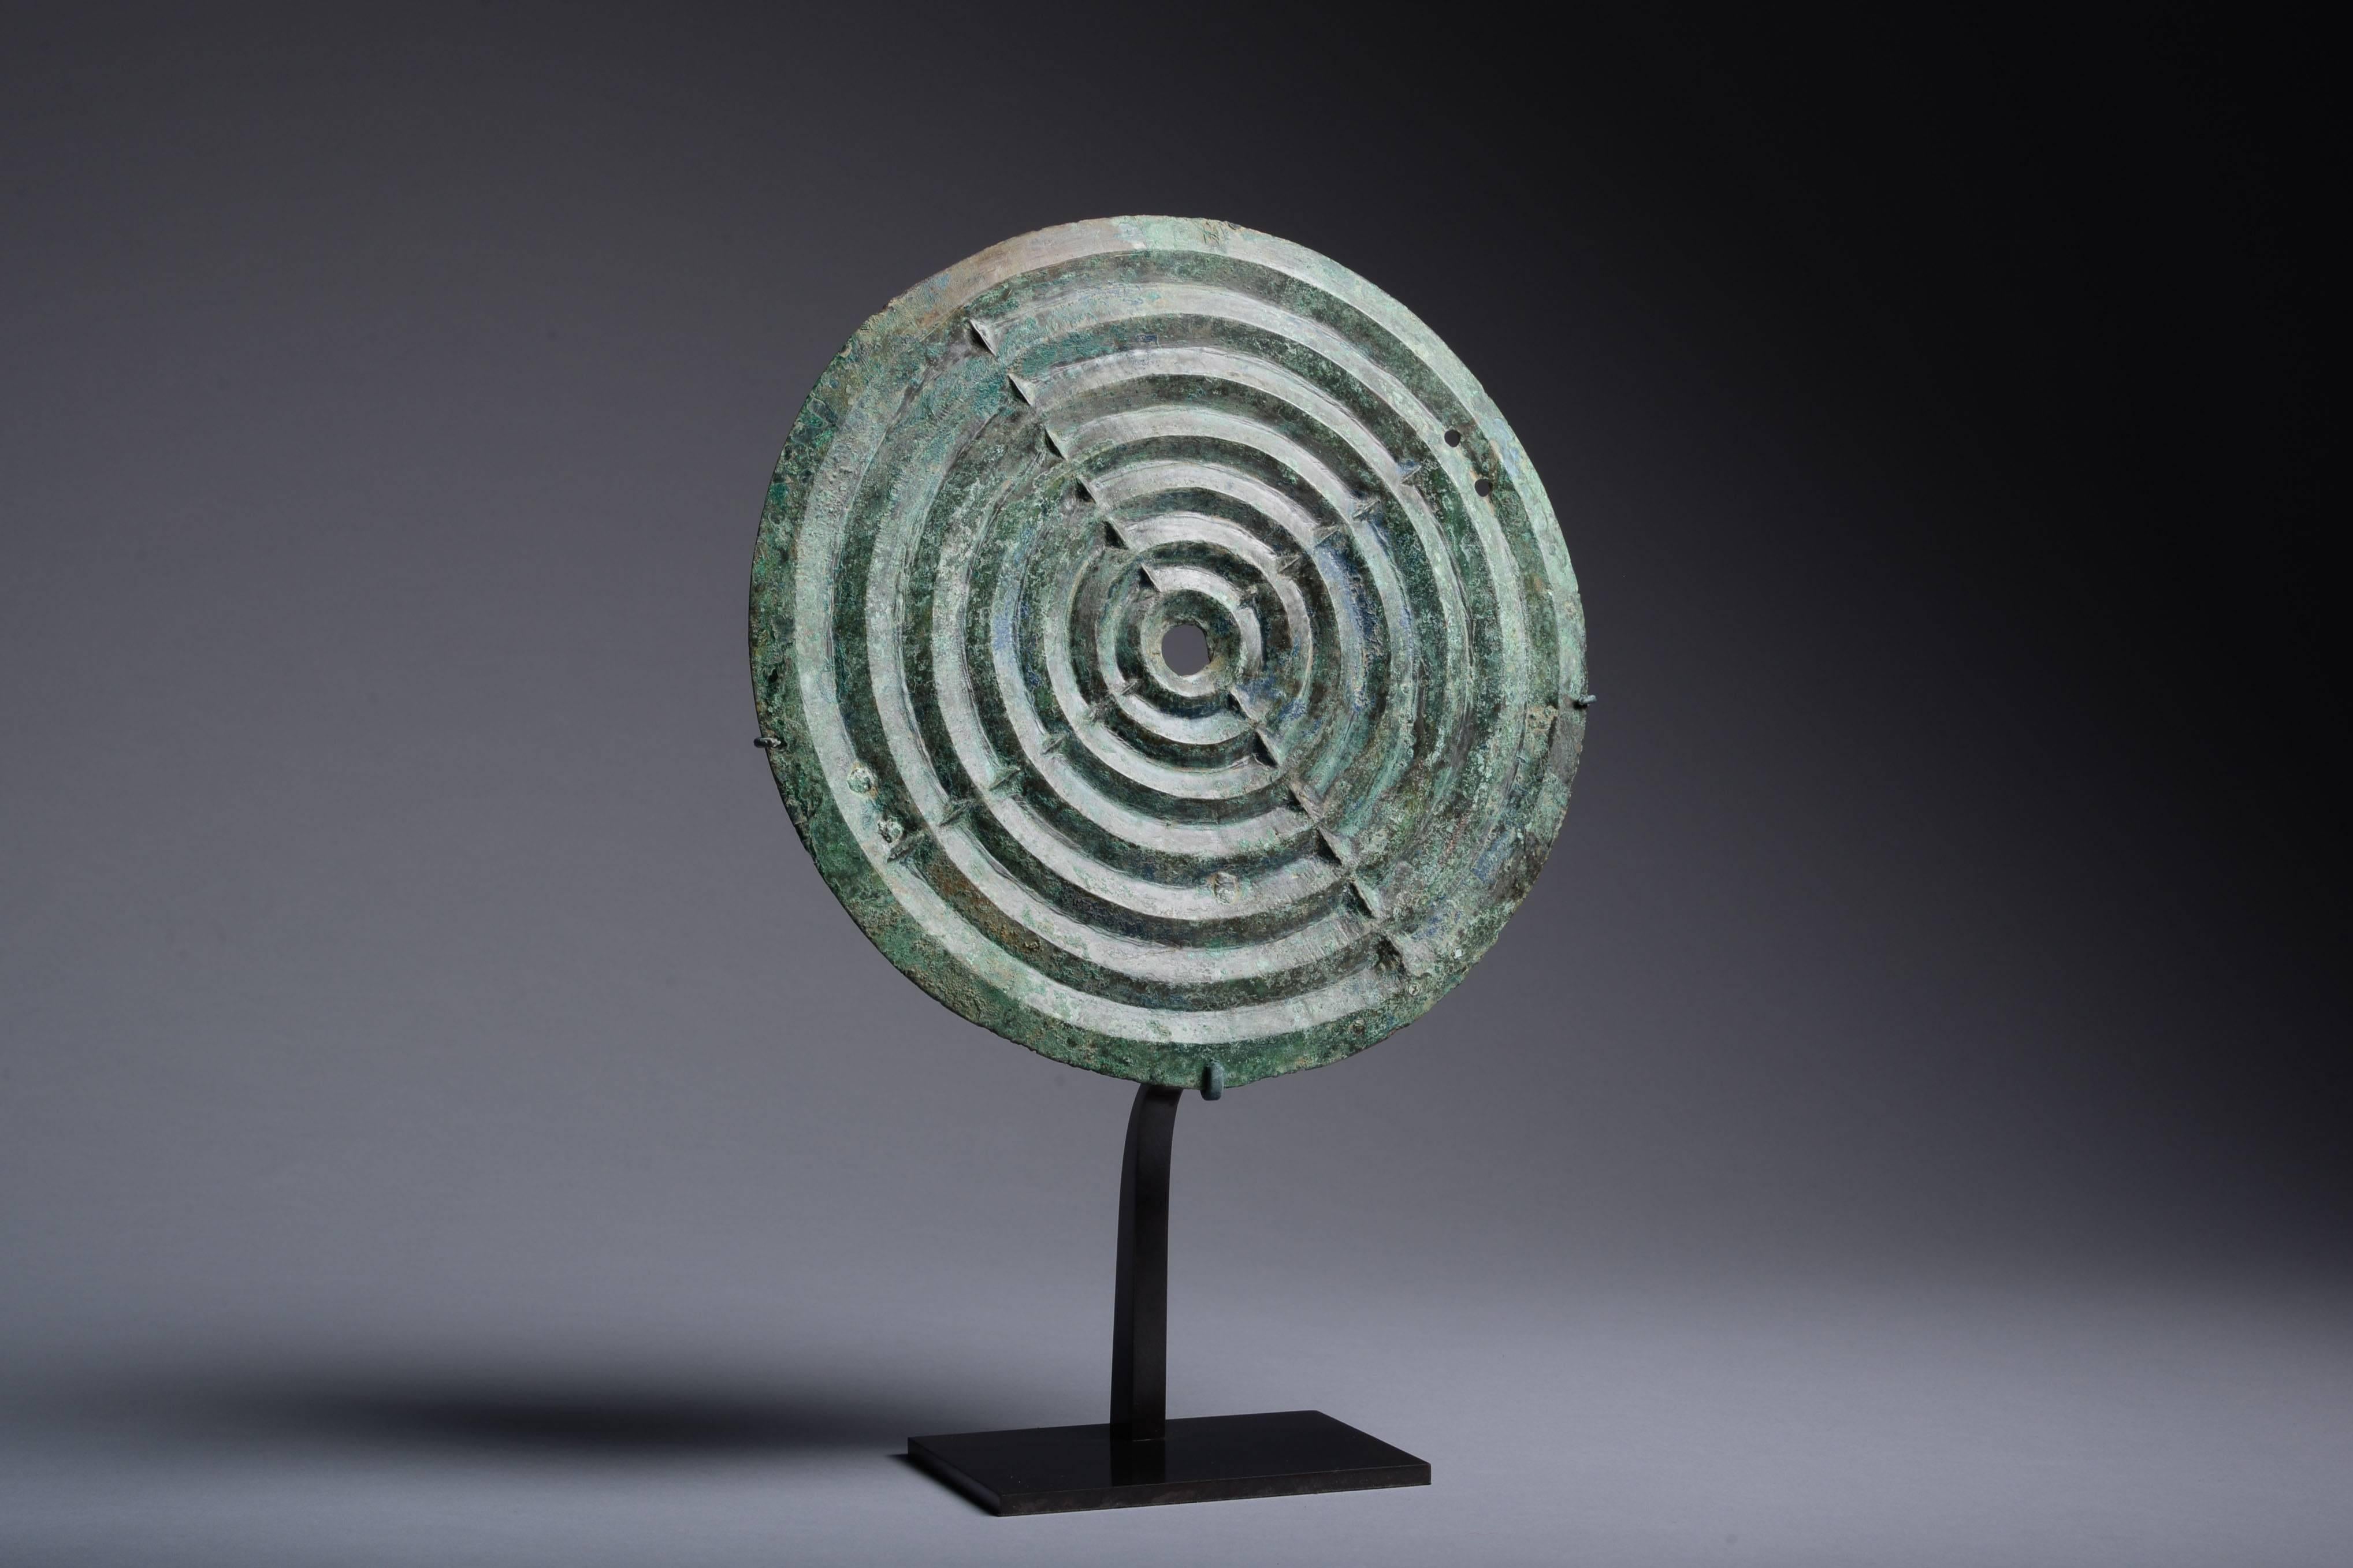 A heavy cast, thick plate of bronze covered with a beautiful green and blue patina.

The Villanovan period is regarded as the earliest phase of Etruscan civilisation. Archaeological evidence and ancient literature alike show that the Etruscans had a